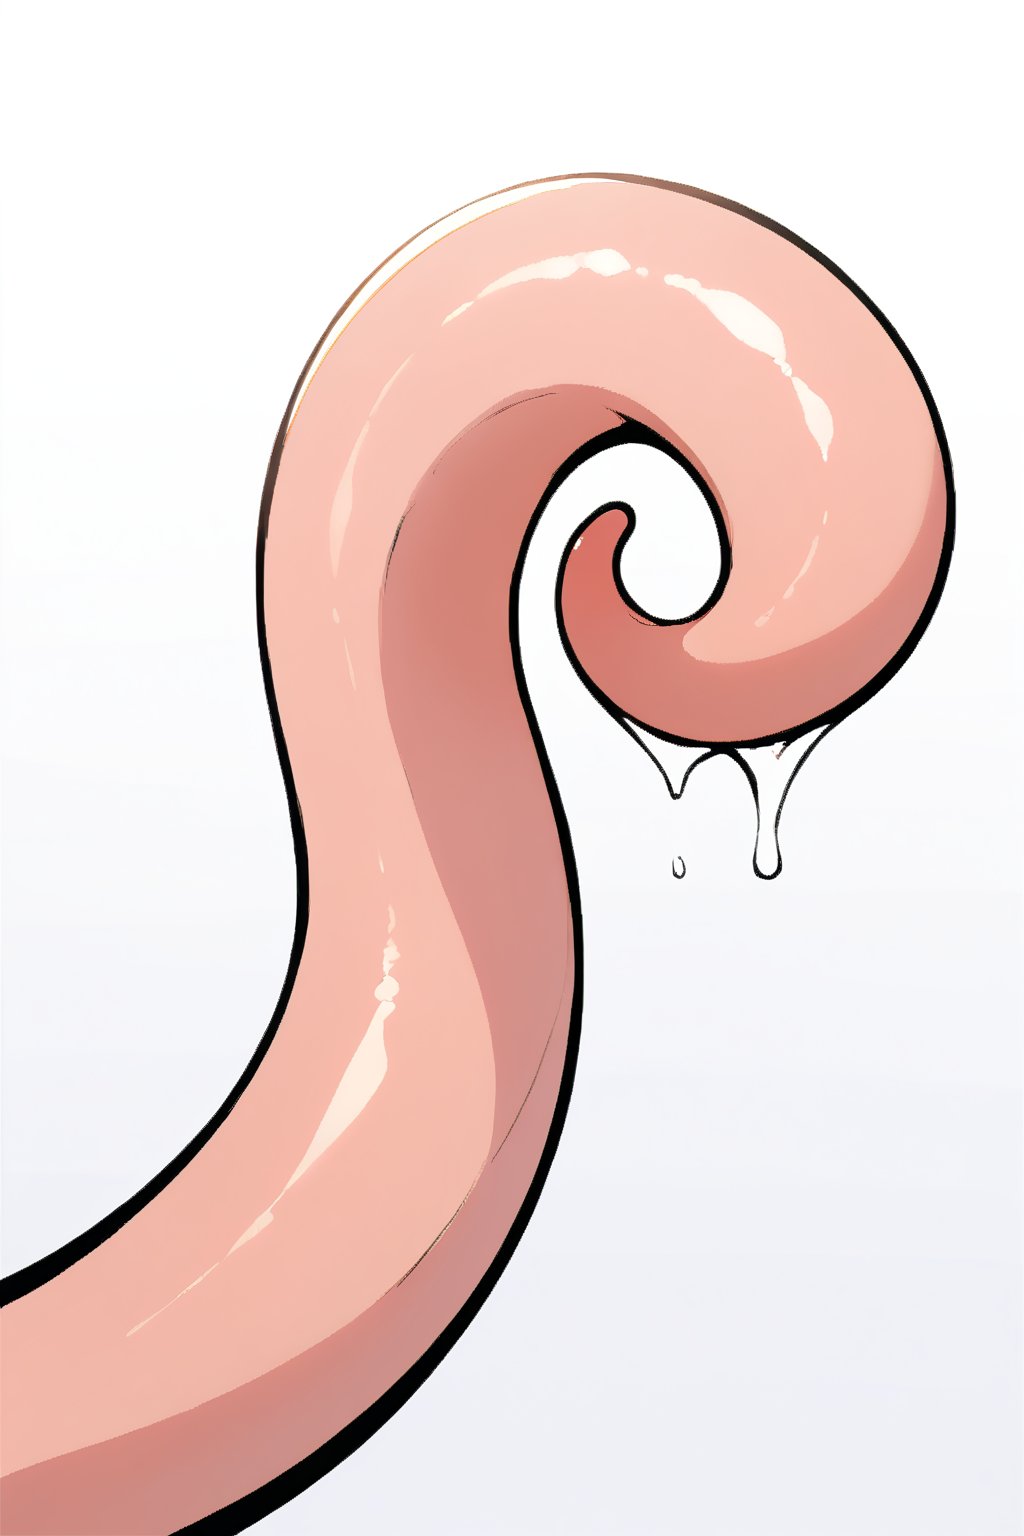 score_9, score_8_up, score_7_up, score_6_up, source_anime, BREAK
1girl, solo, Luna, close up, cute girl with tentacle mouth, white background, white outline, 2D, vector art, 